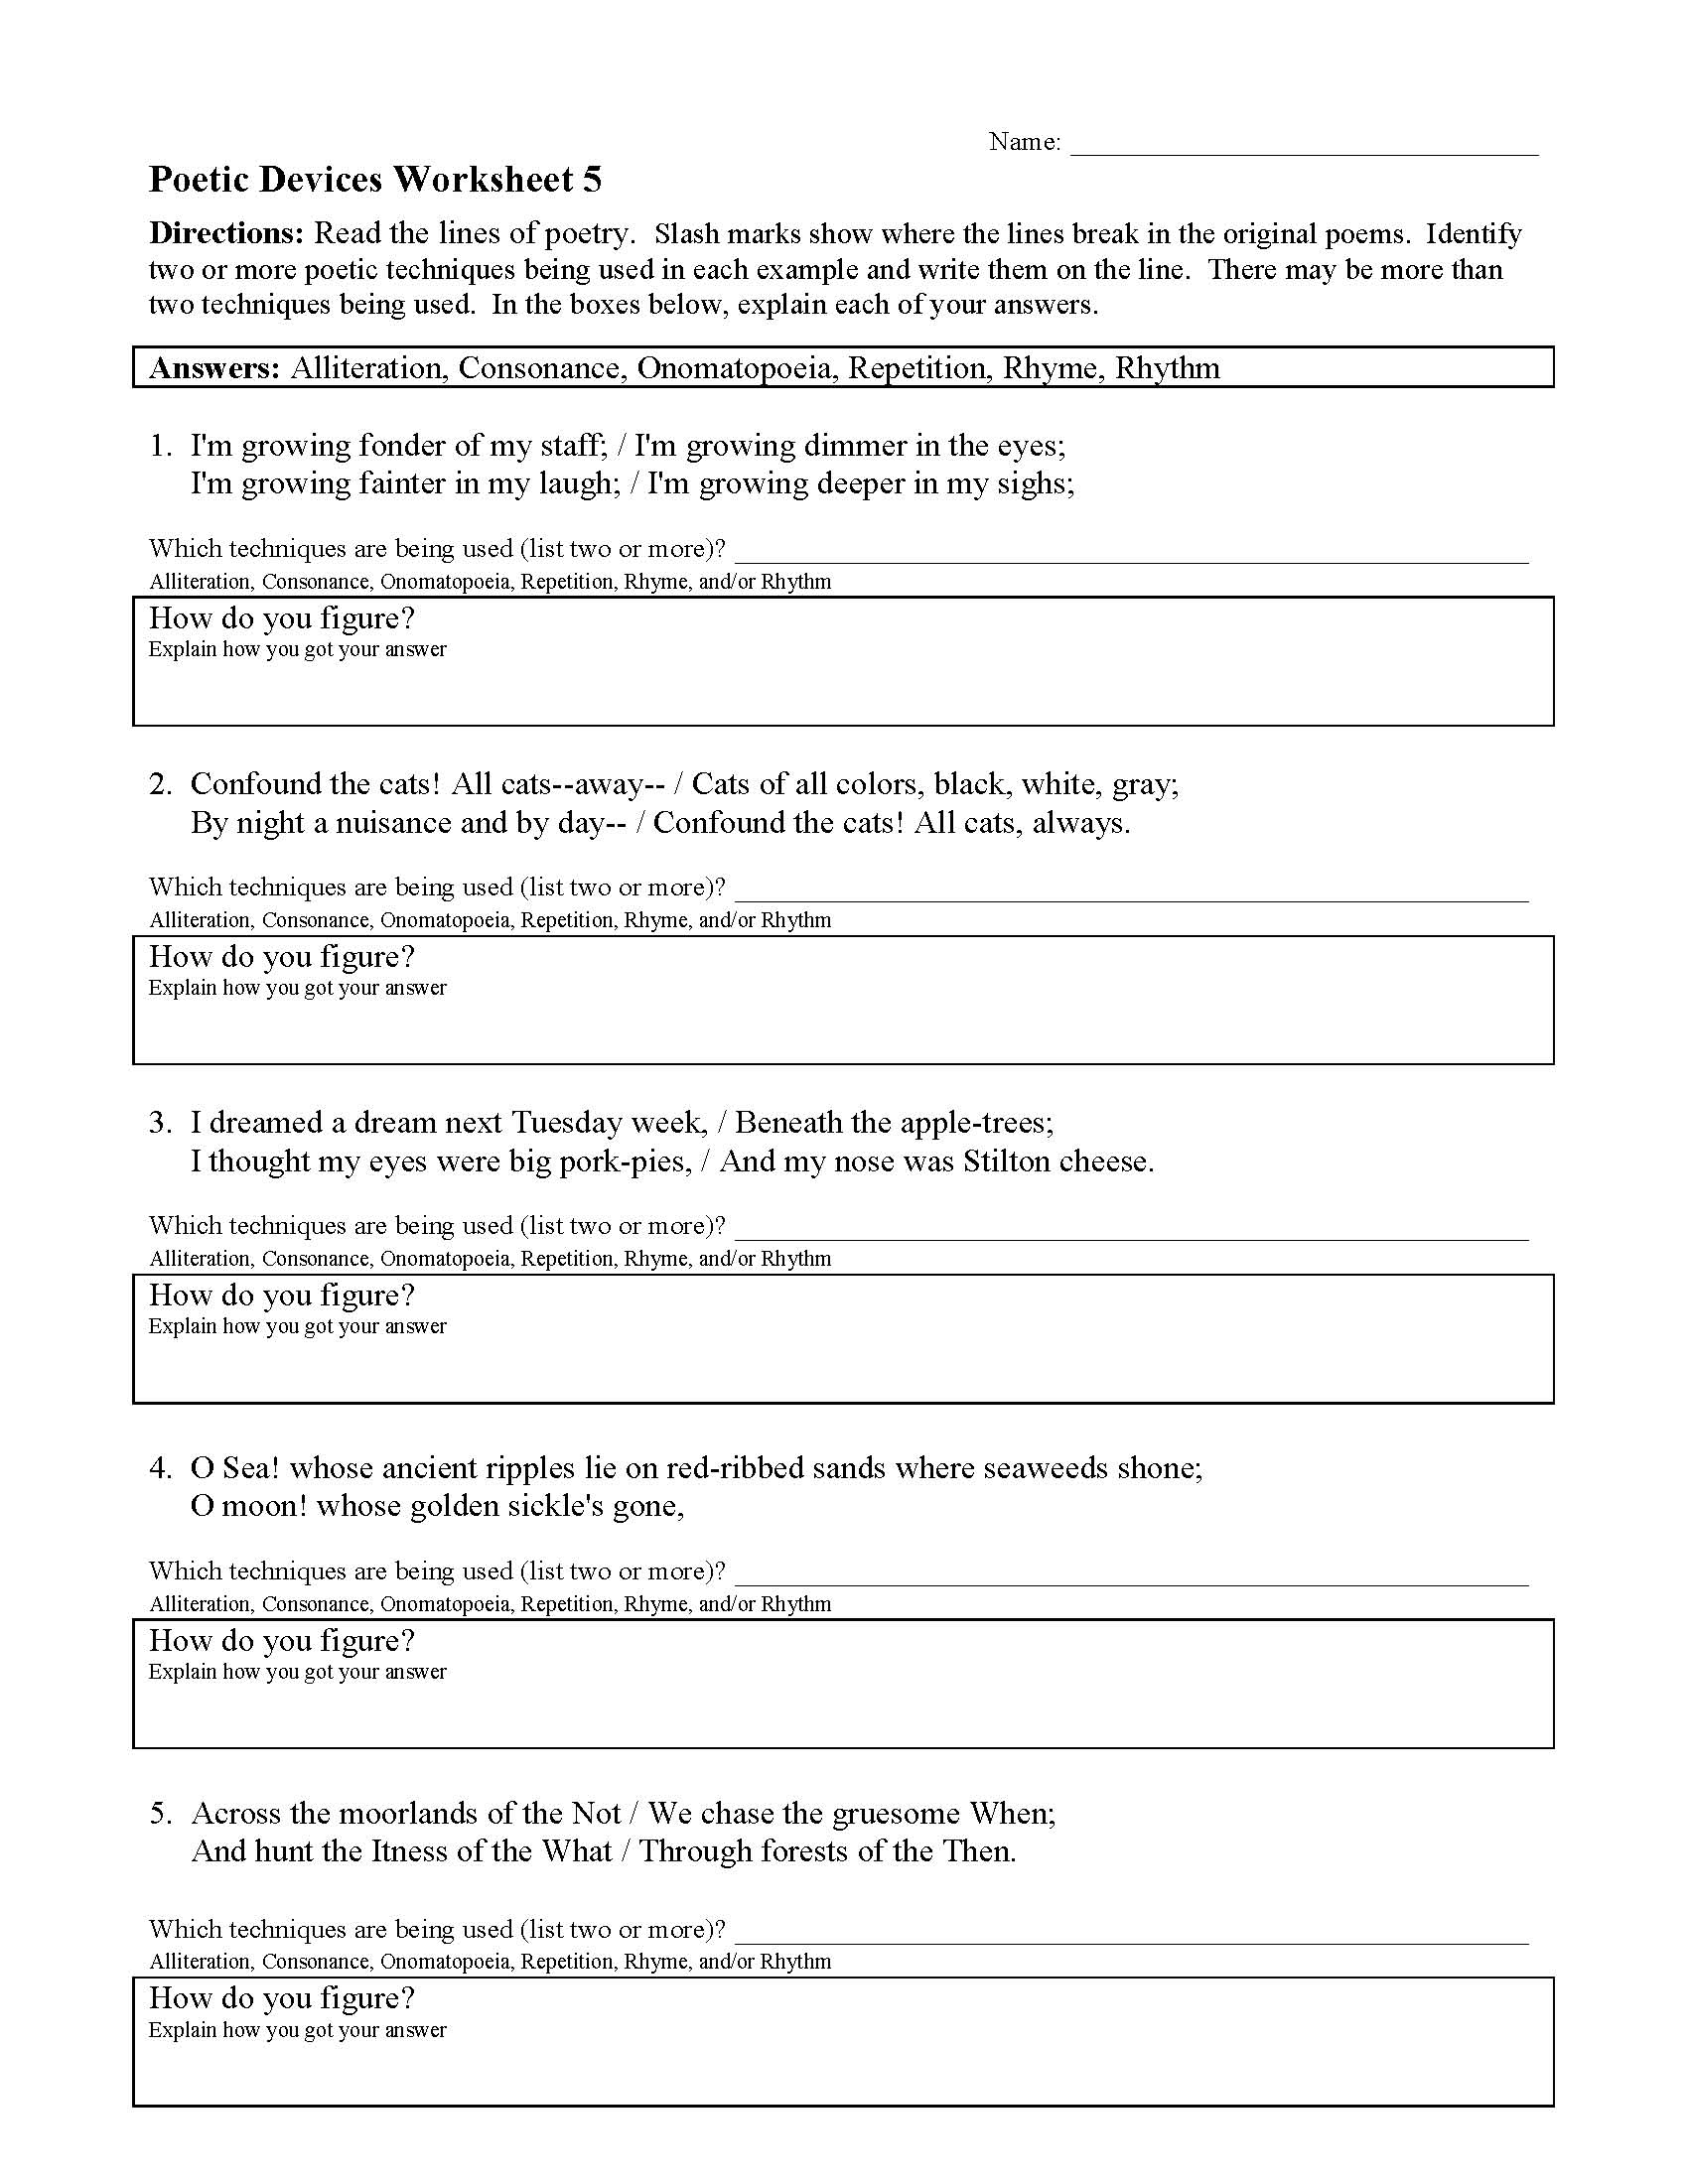 Poetic Devices Worksheet 20  Reading Activity Regarding Poetic Devices Worksheet 1